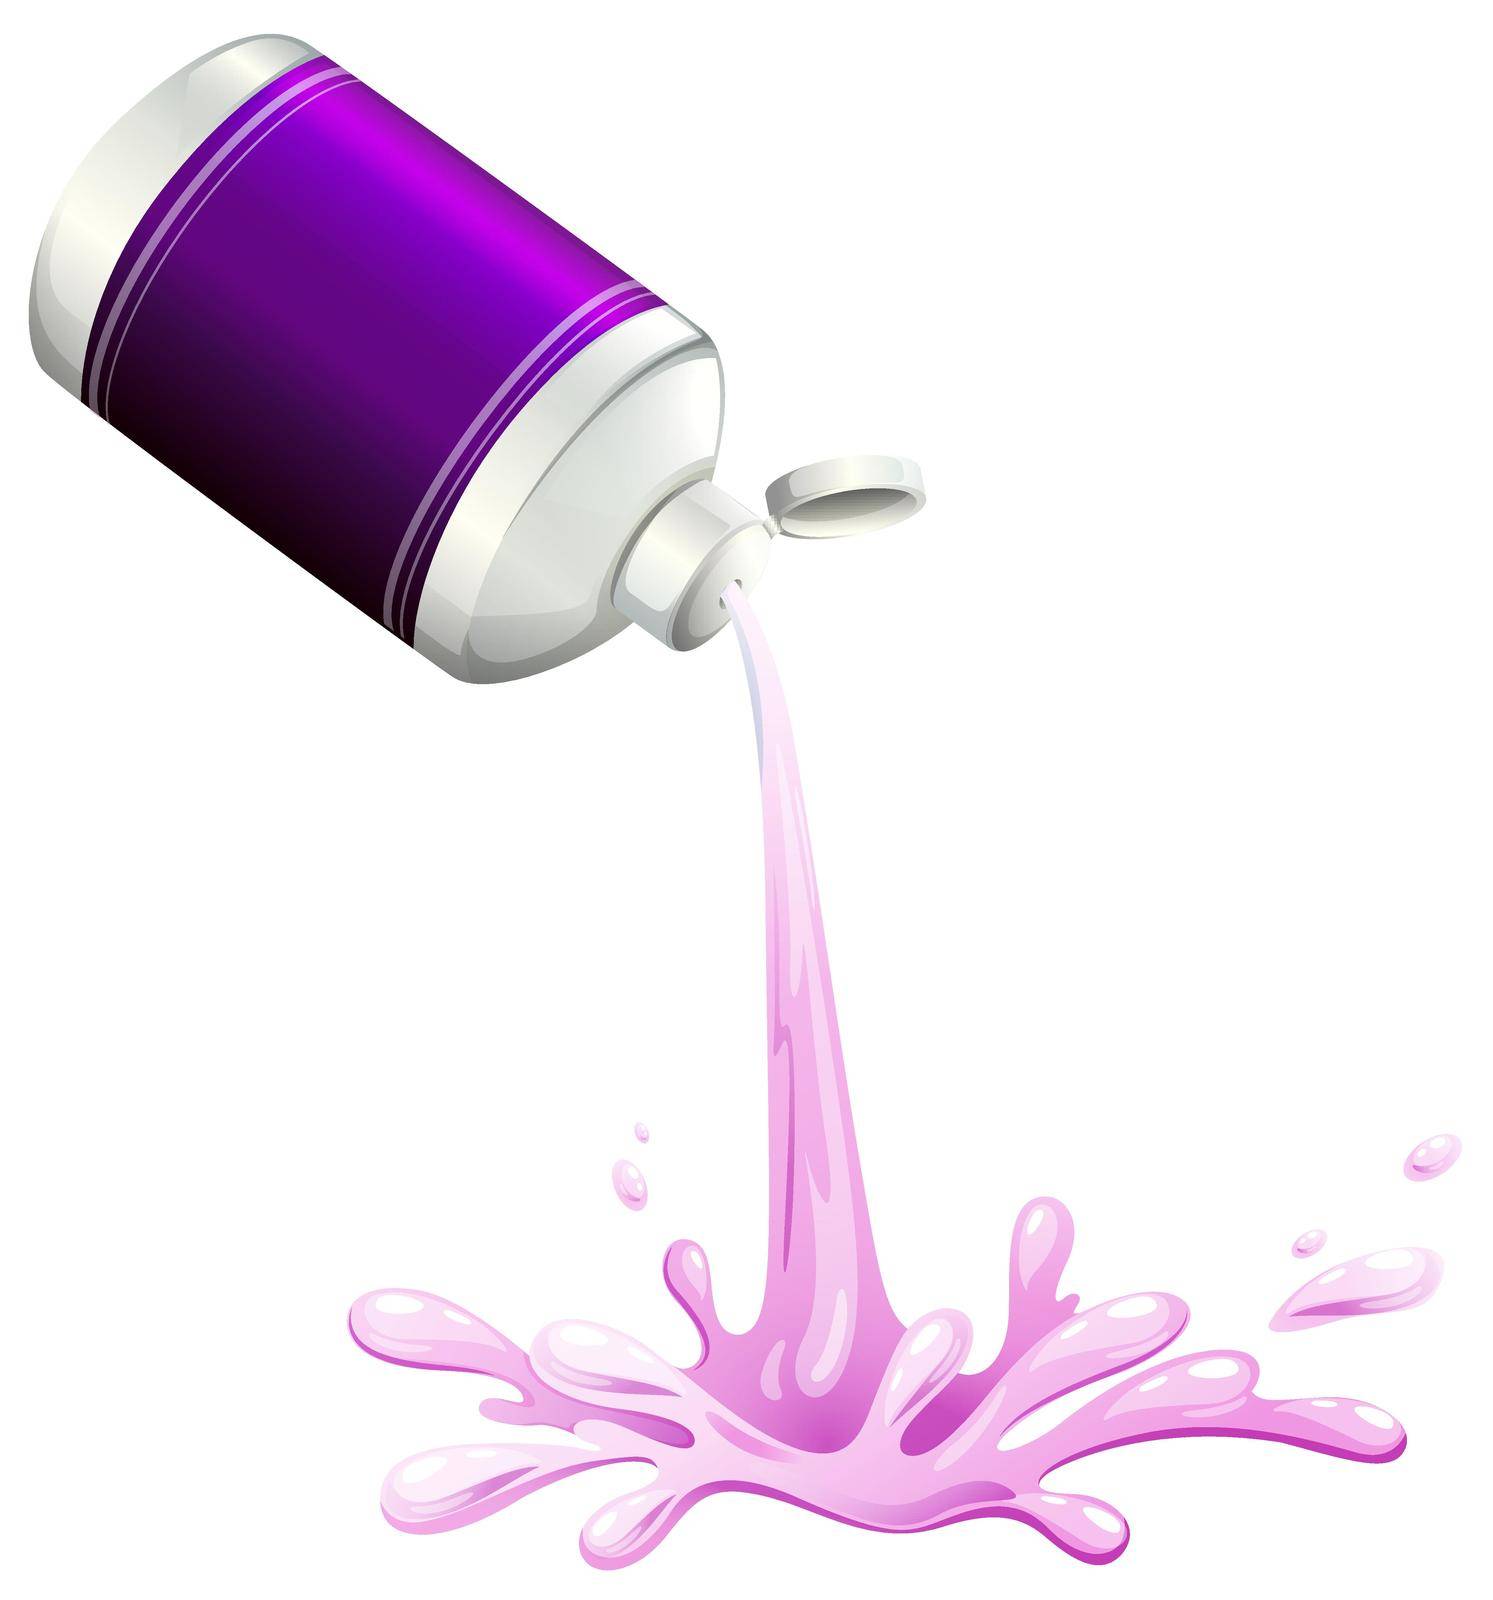 Illustration of a purple ink on a white background